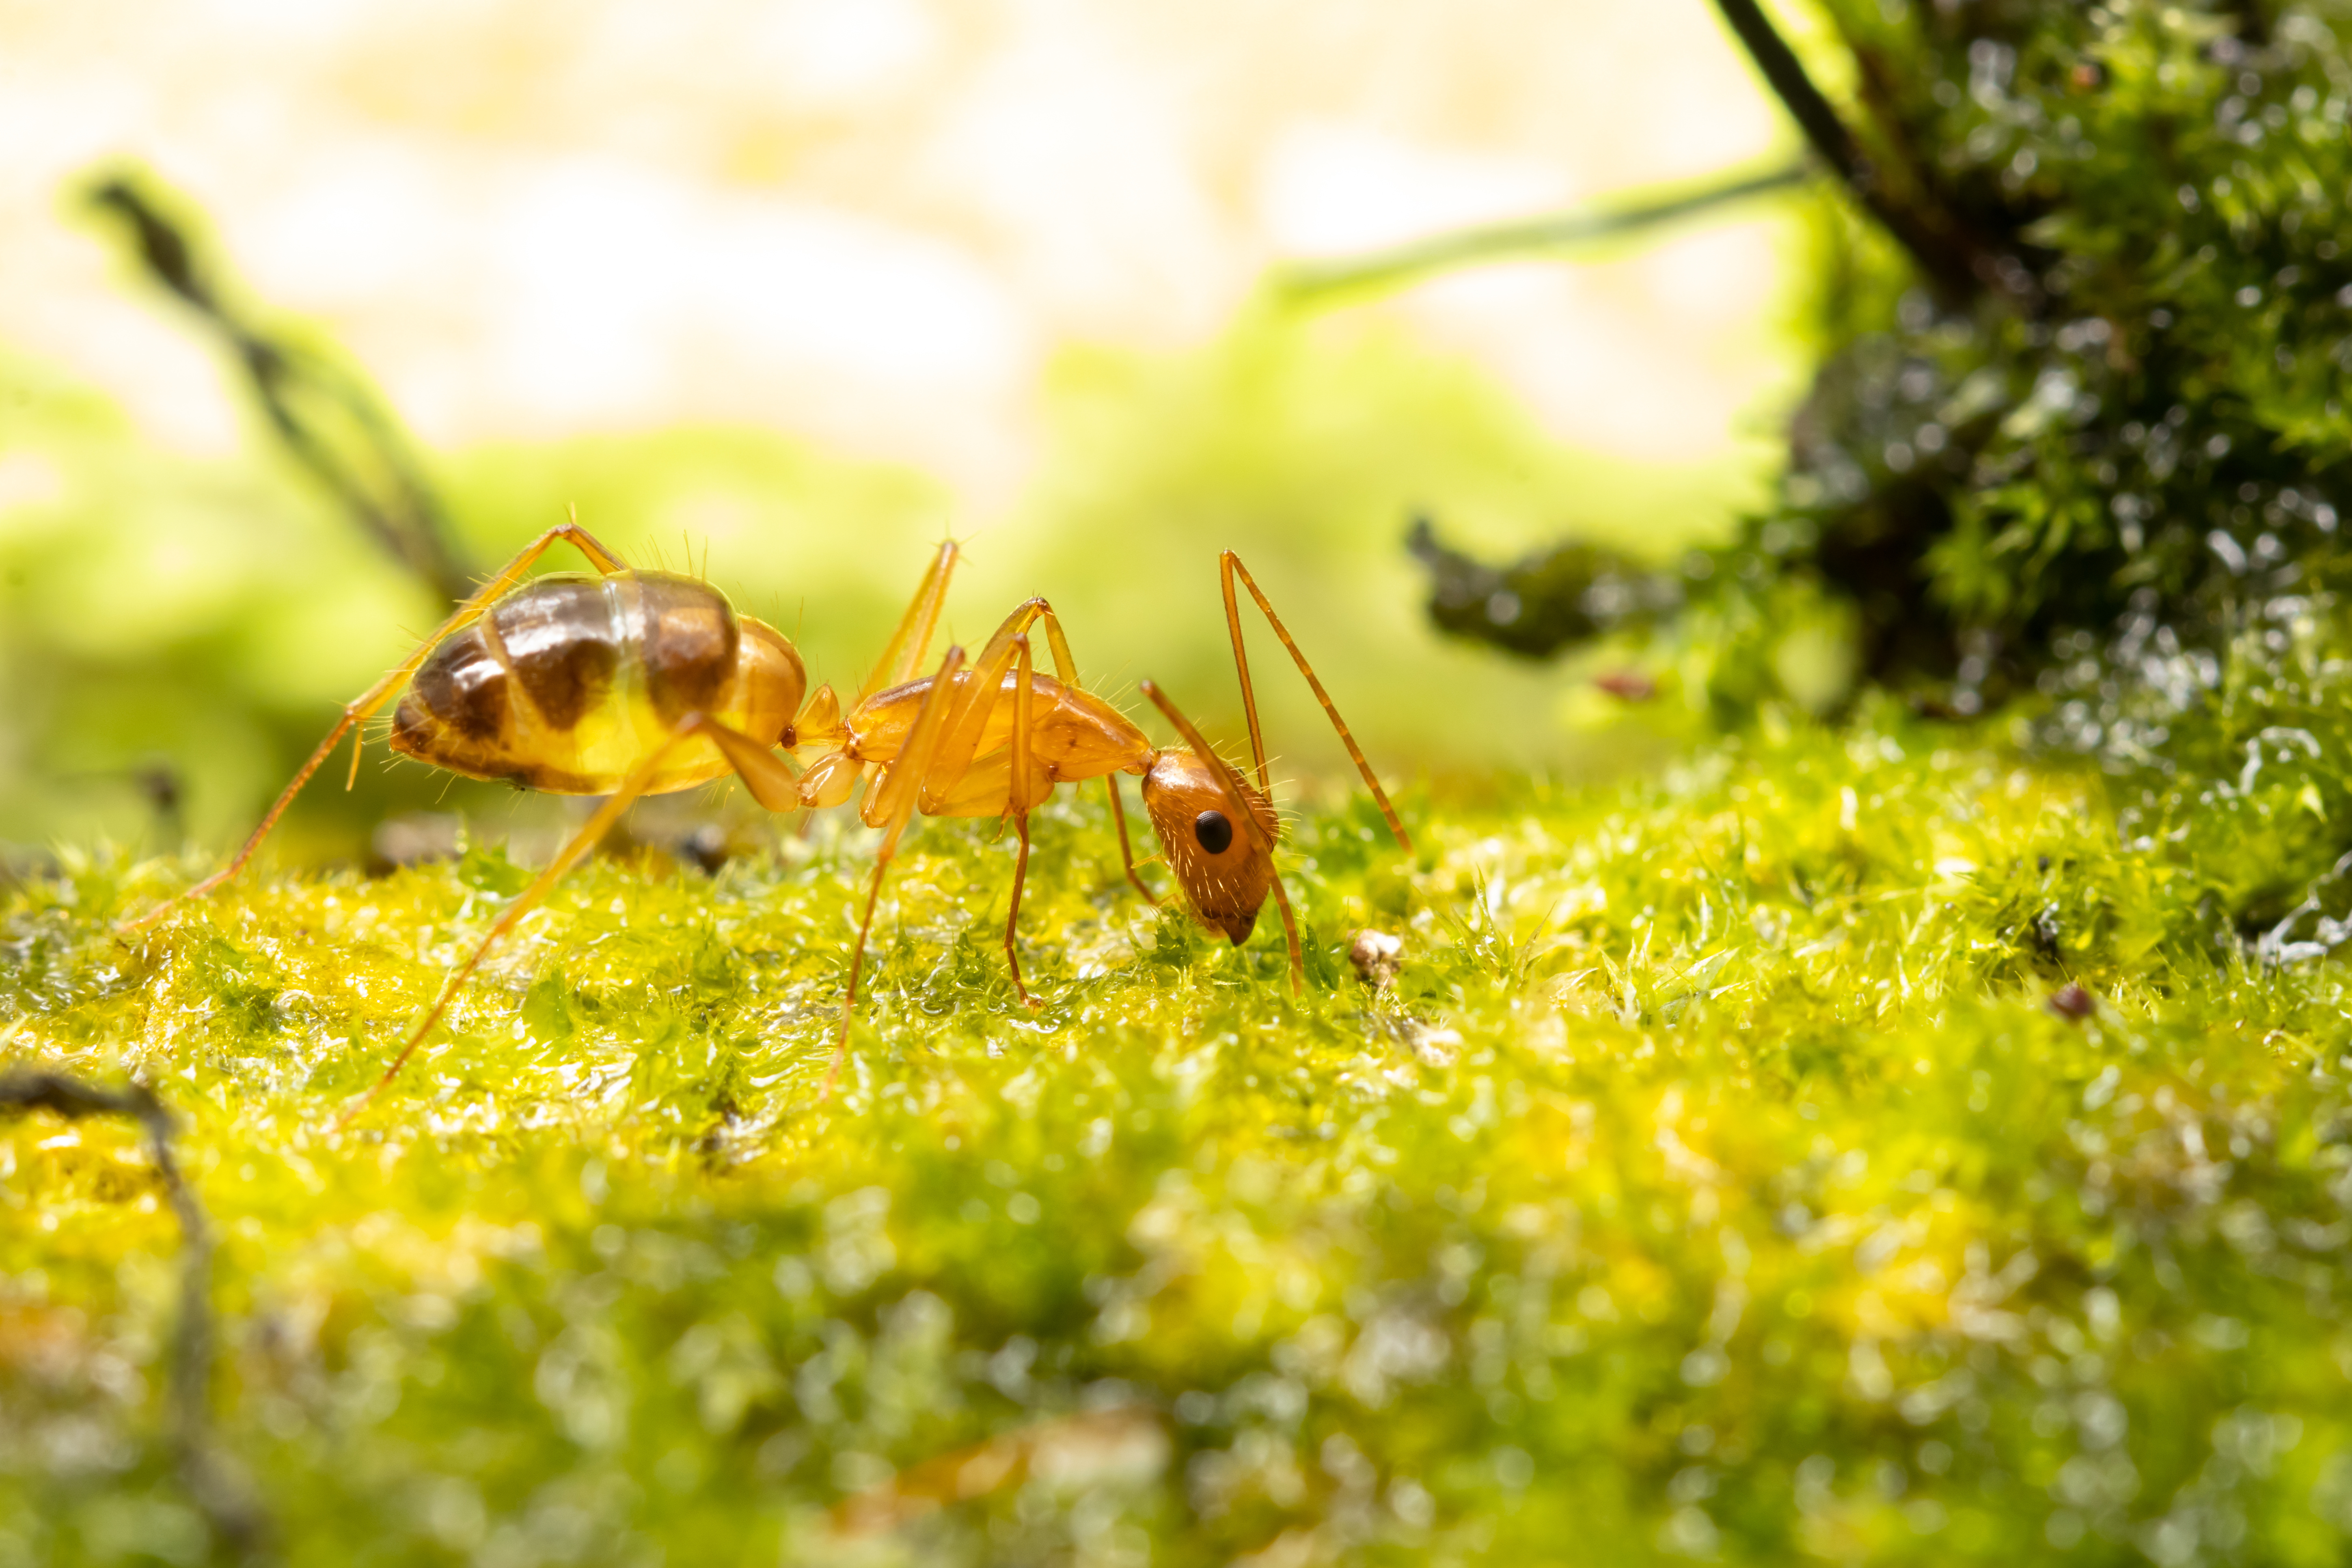 A closeup image of a crazy ant - GGA Pest Management offers extermination services for crazy ants in Killeen, TX.